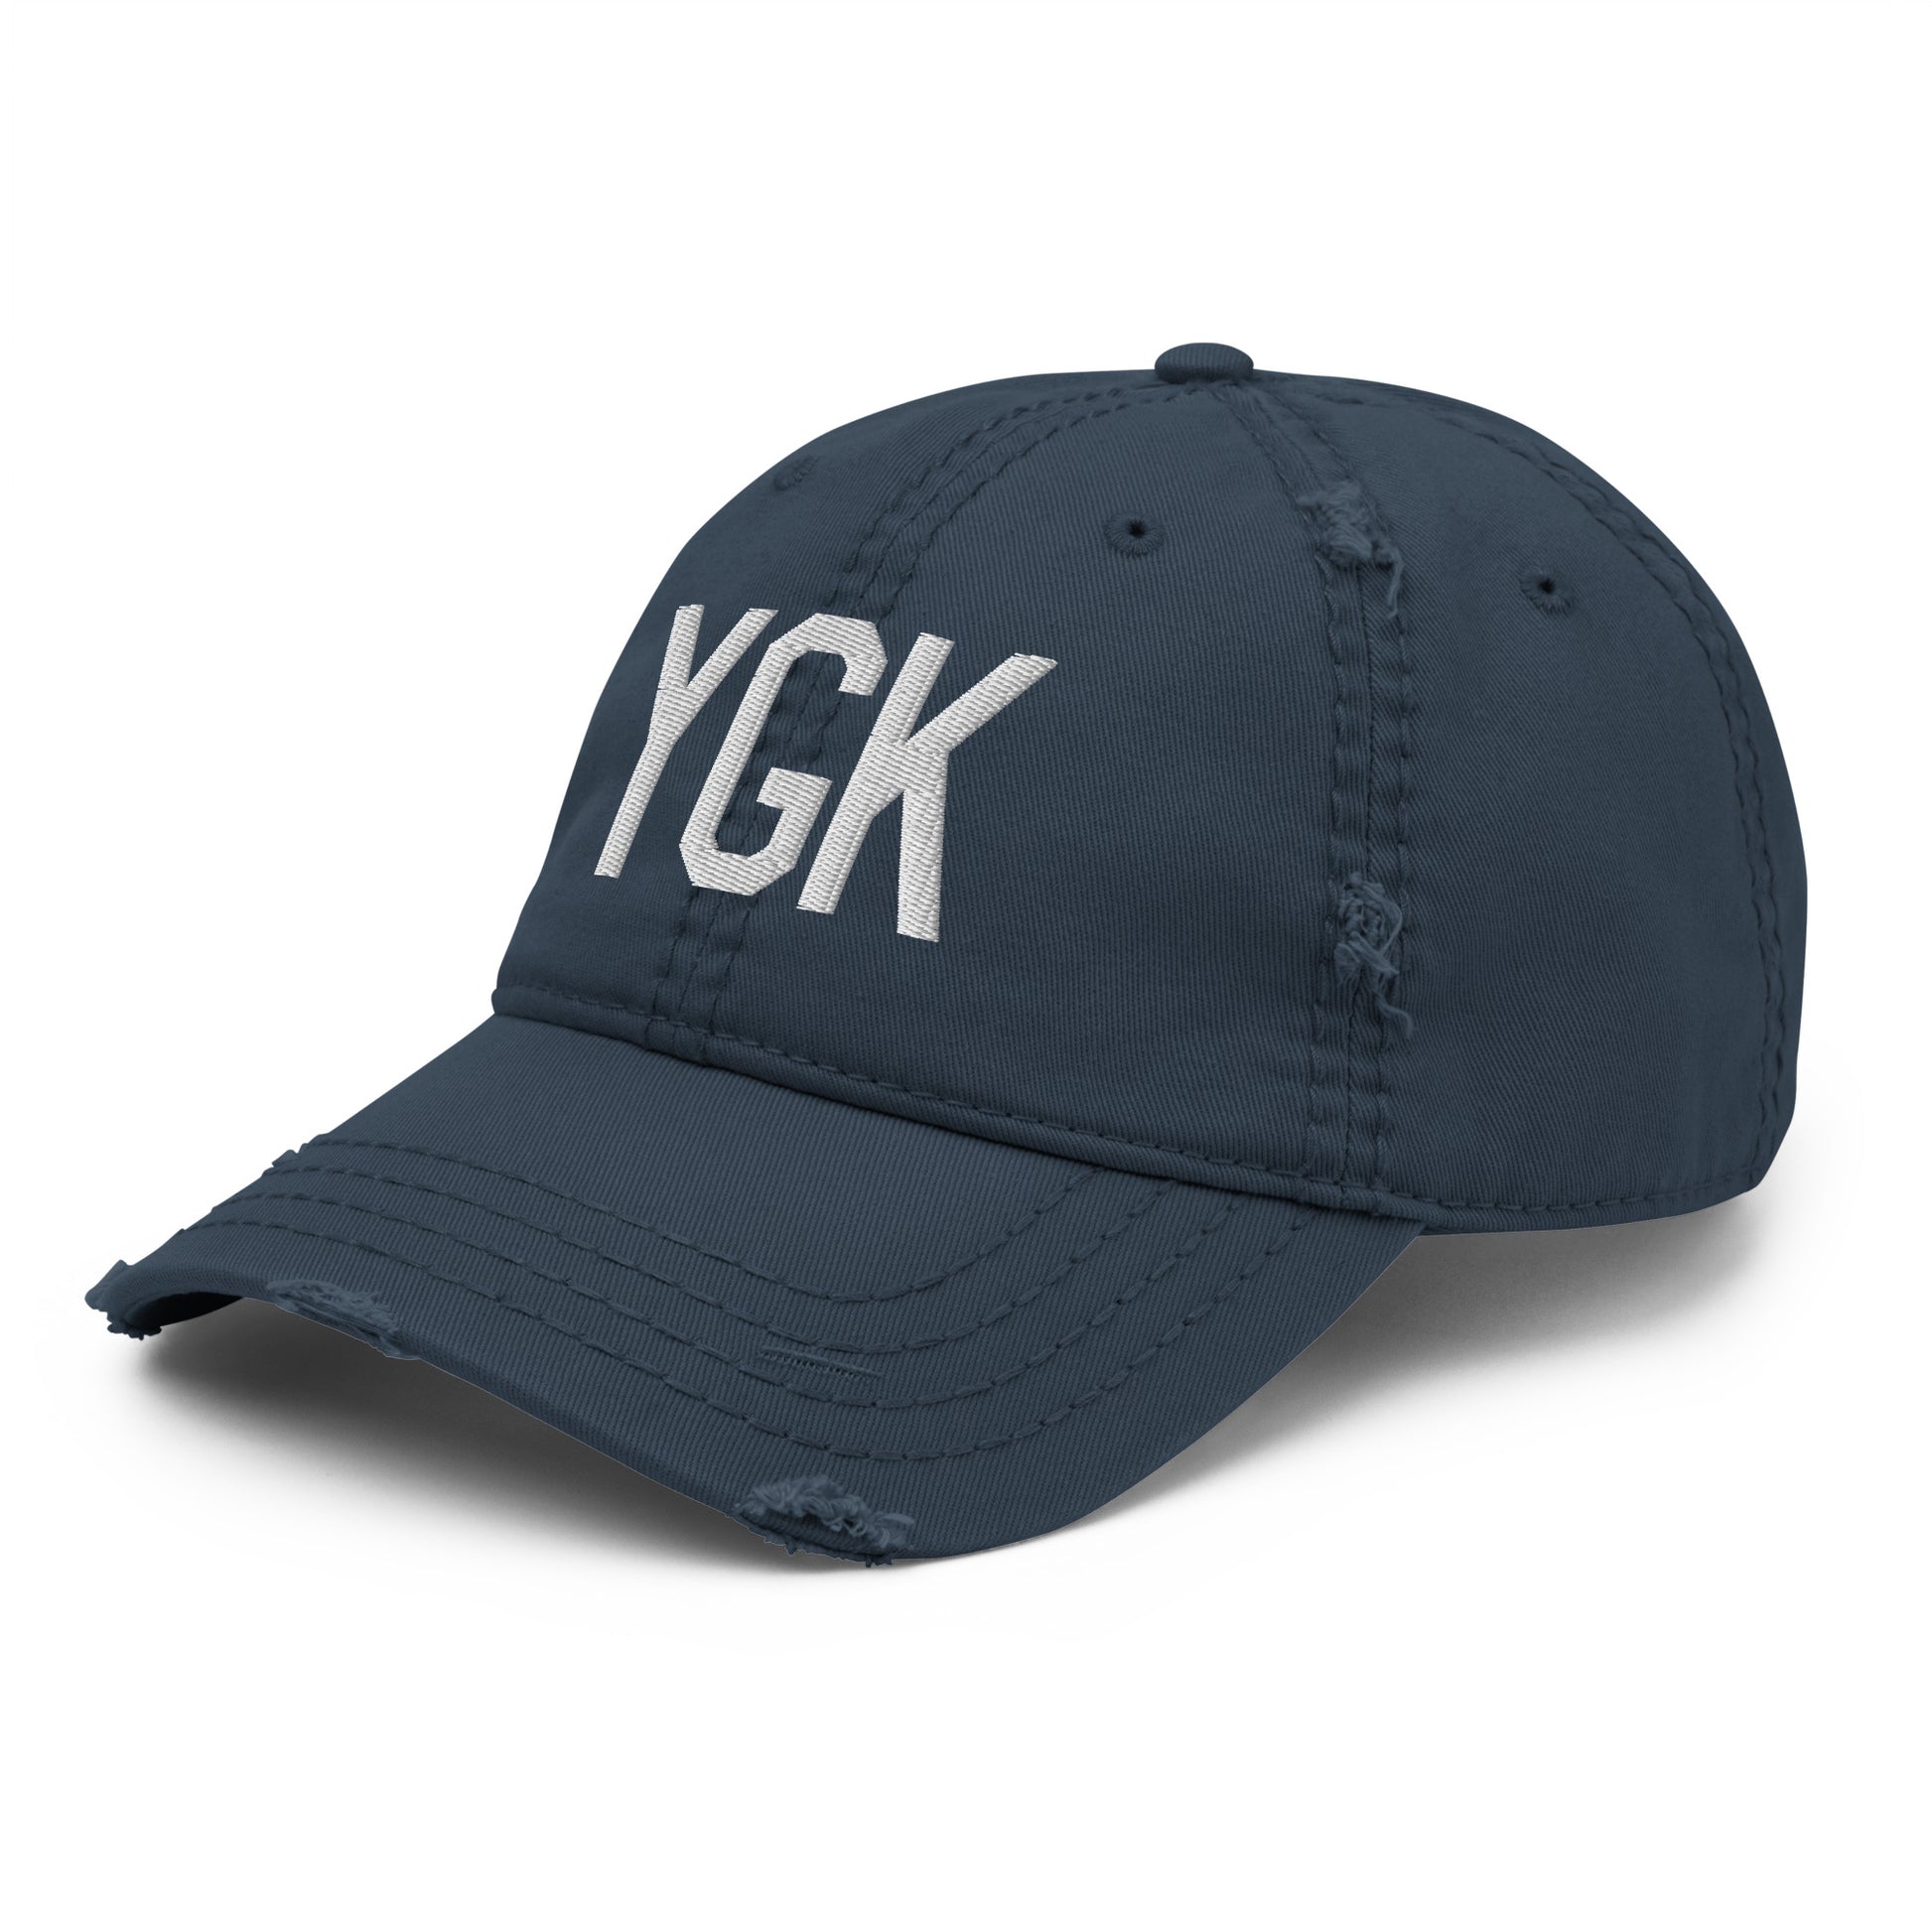 Airport Code Distressed Hat - White • YGK Kingston • YHM Designs - Image 01